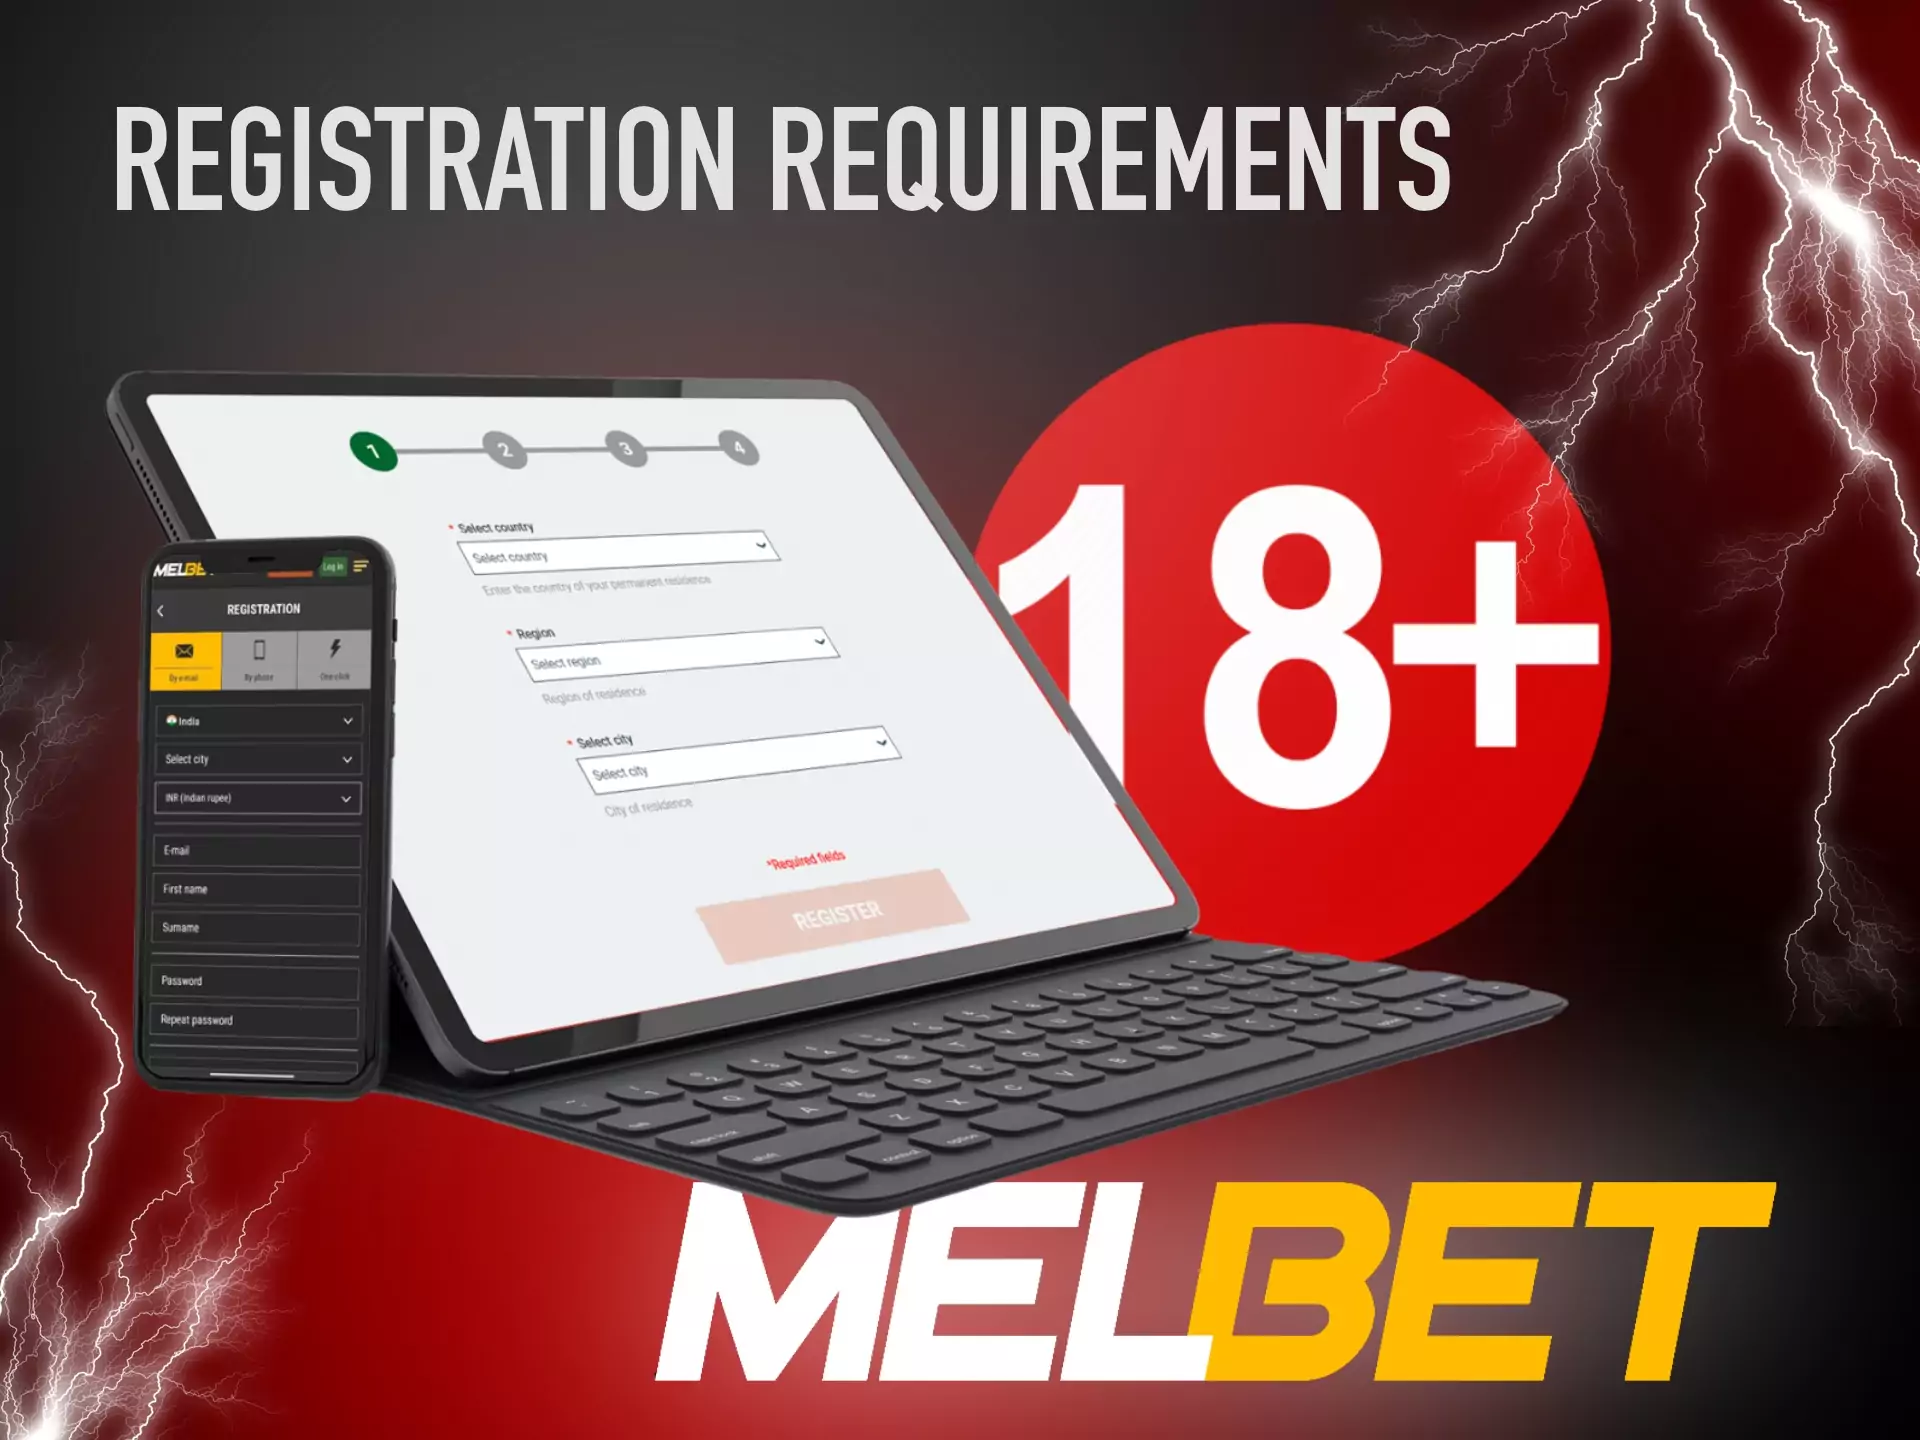 Meet all the requirements to create your Melbet account.